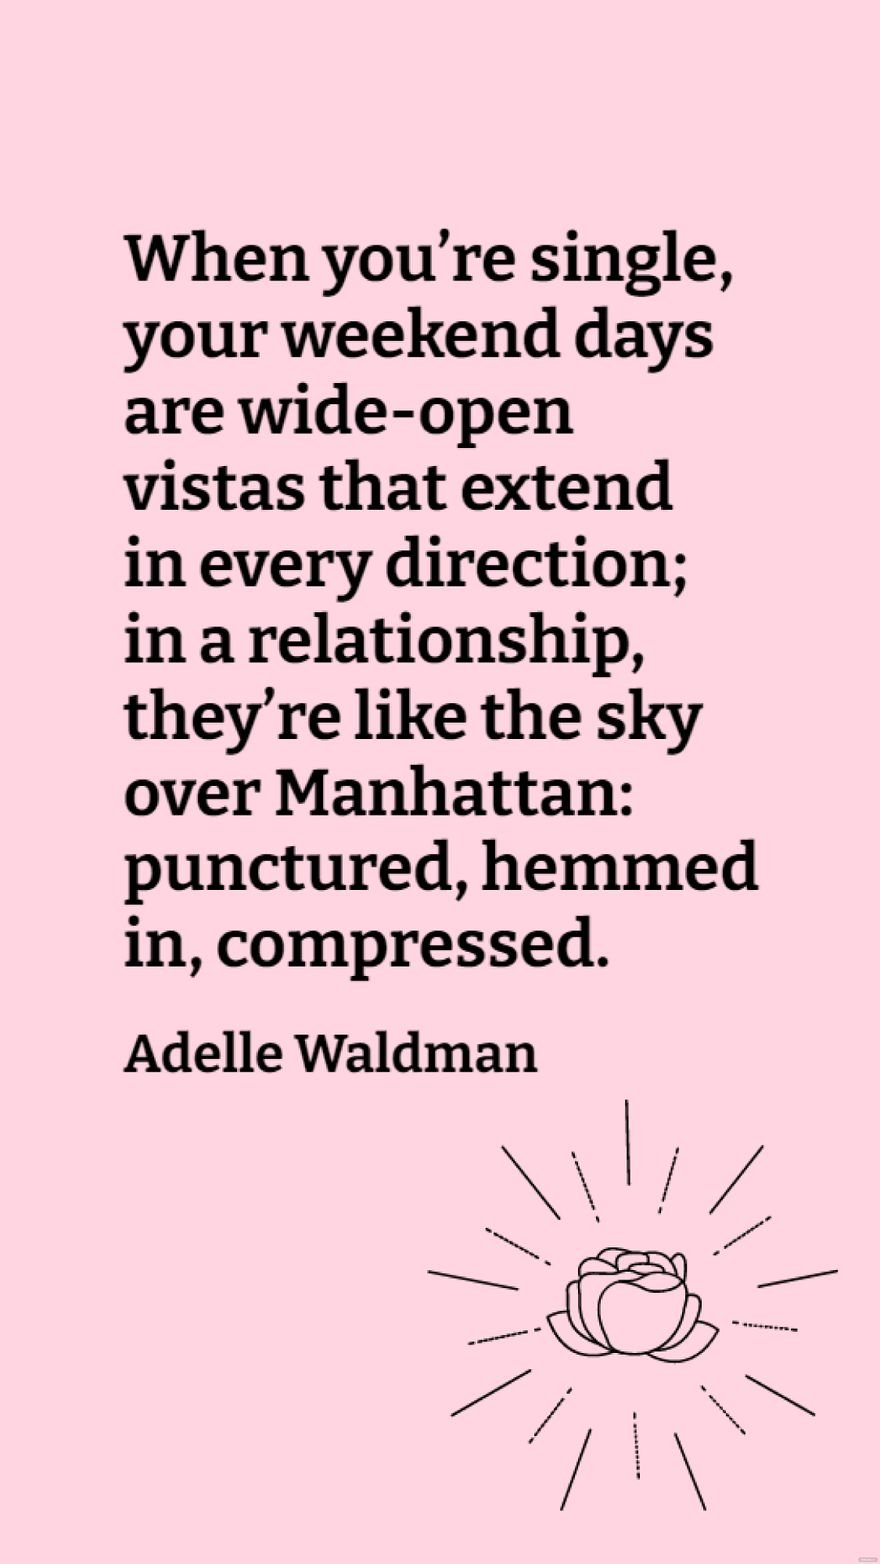 Adelle Waldman - When you’re single, your weekend days are wide-open vistas that extend in every direction; in a relationship, they’re like the sky over Manhattan: punctured, hemmed in, compressed. 